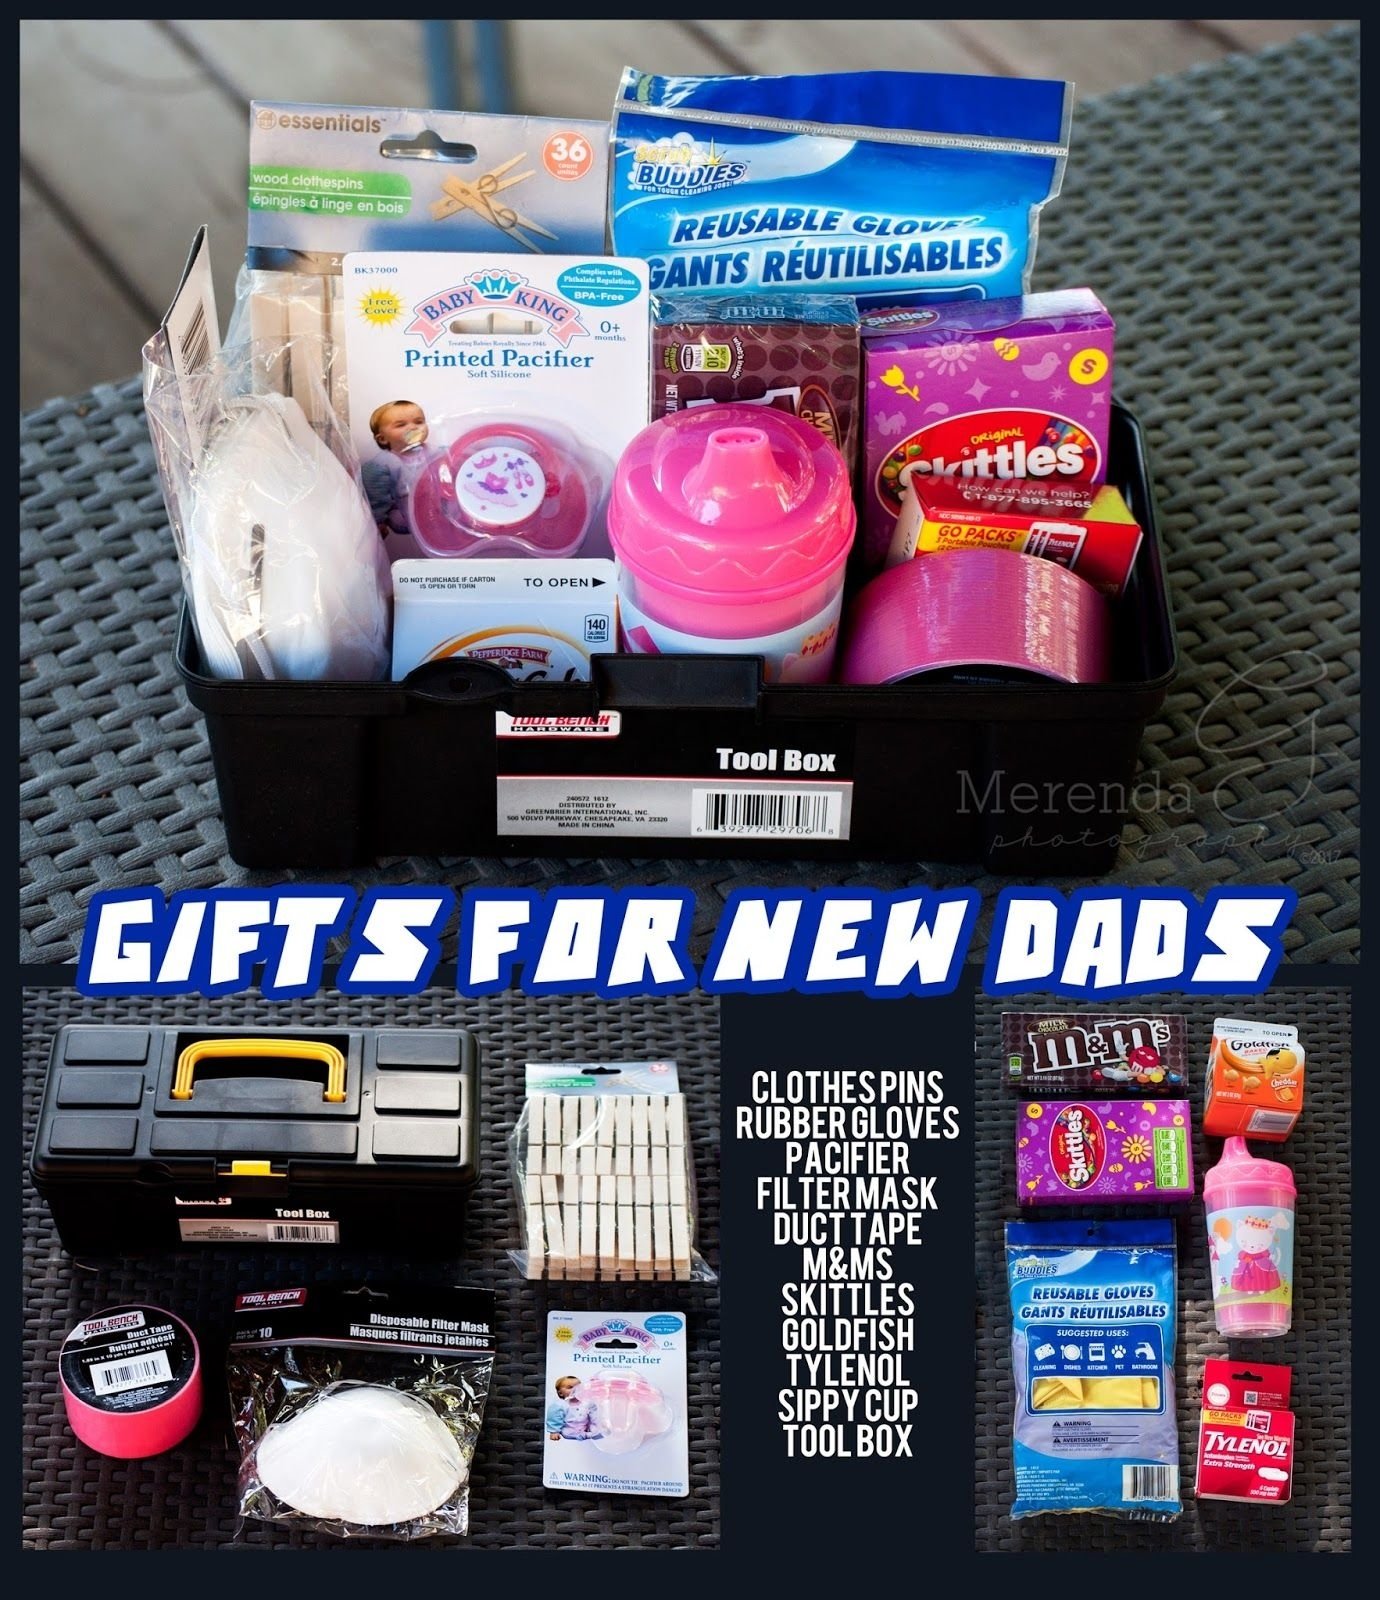 10 Famous Gift Ideas For New Dad growing with the gordons gift ideas for new dads daddy survival kit 1 2022